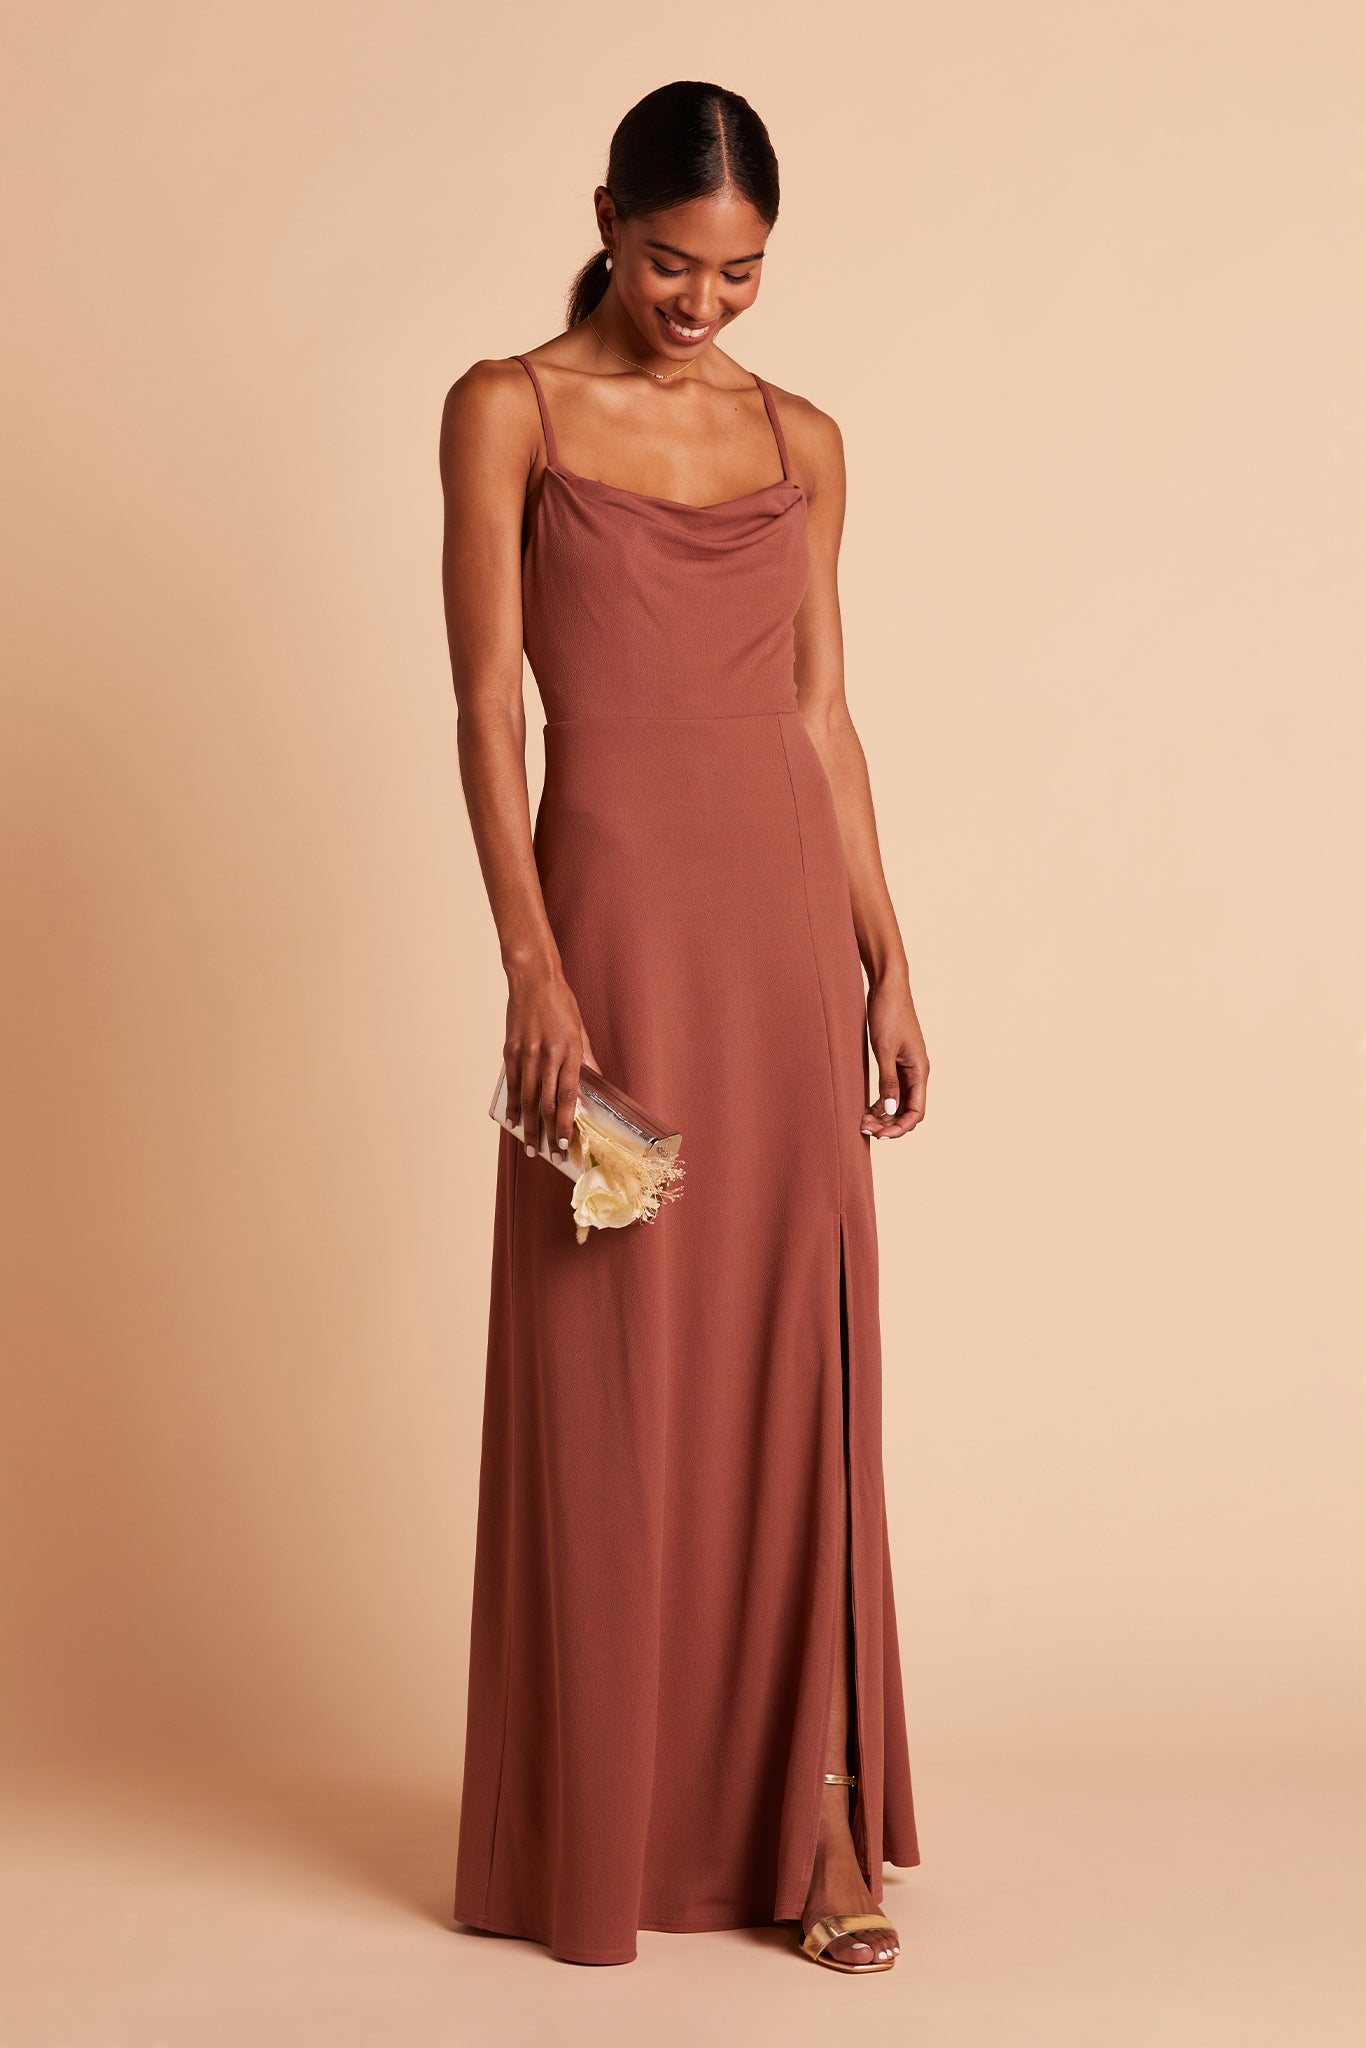 Ash convertible bridesmaid dress with slit in desert rose crepe by Birdy Grey, front view